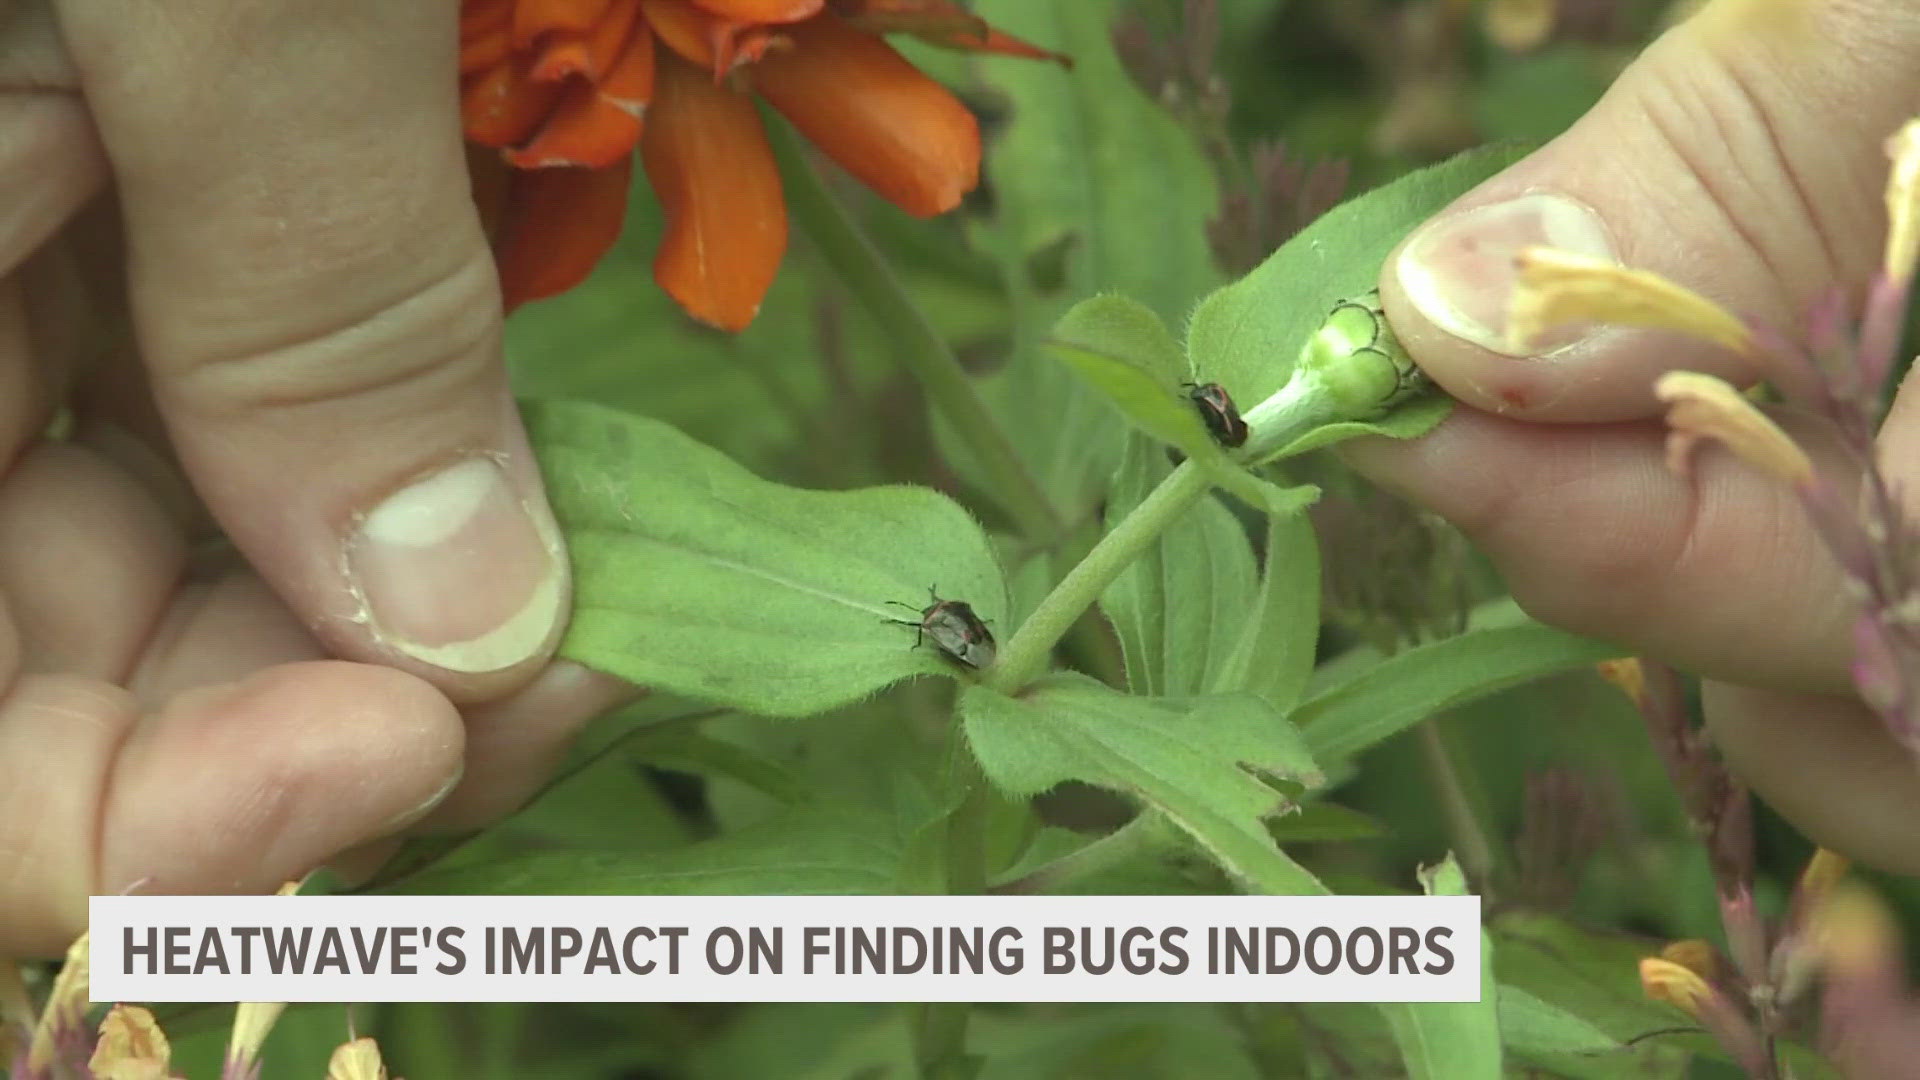 An expert from MSU Entomology said many homes are surrounded by habitats for insects who may find themselves inside seeking cool shelter.